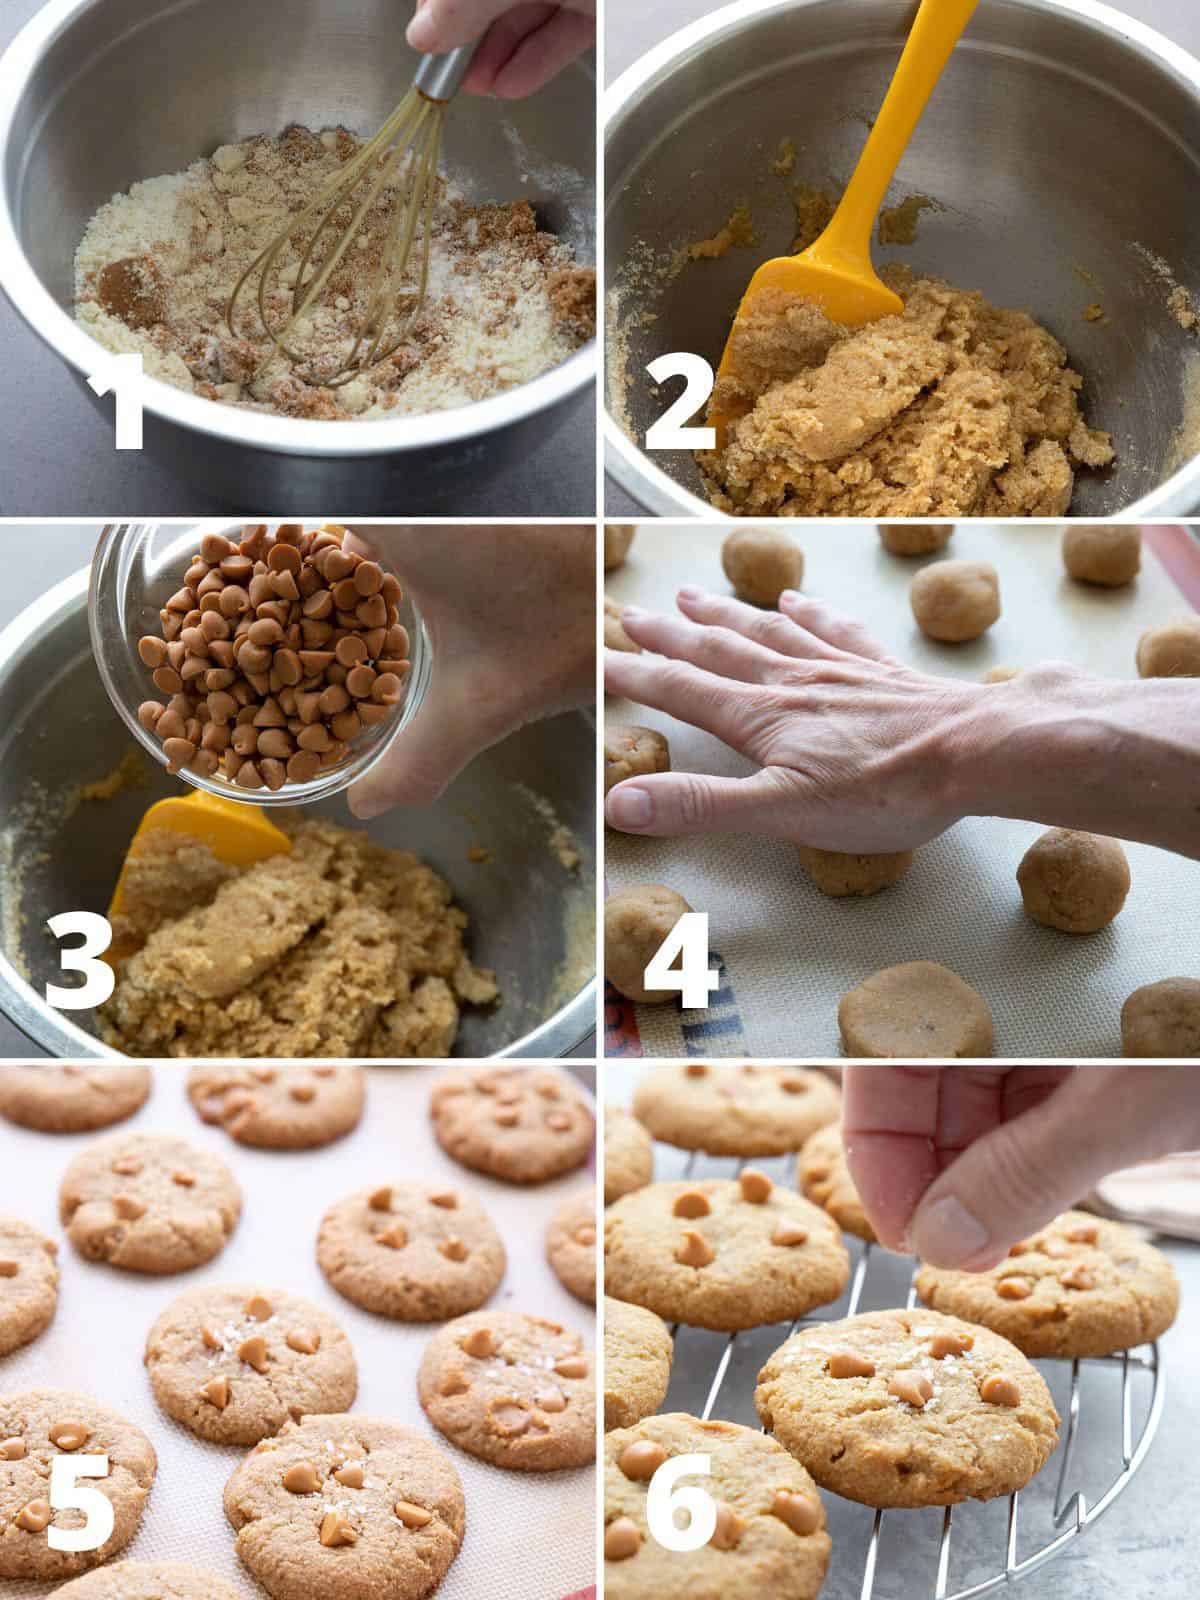 Six images showing the steps for making Keto Butterscotch Cookies.